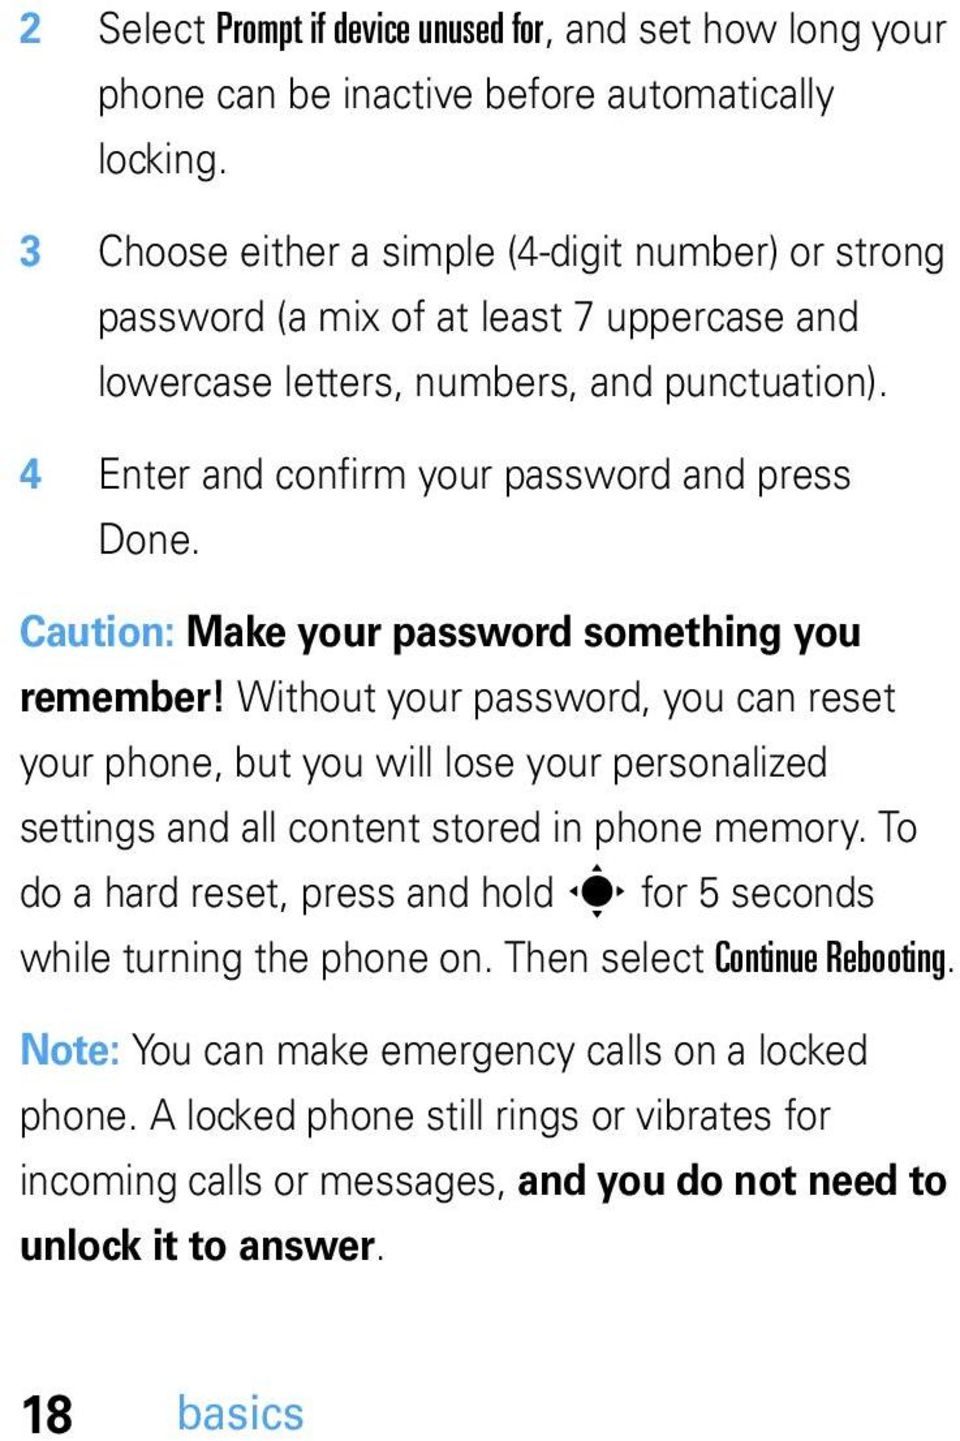 Caution: Make your password something you remember! Without your password, you can reset your phone, but you will lose your personalized settings and all content stored in phone memory.